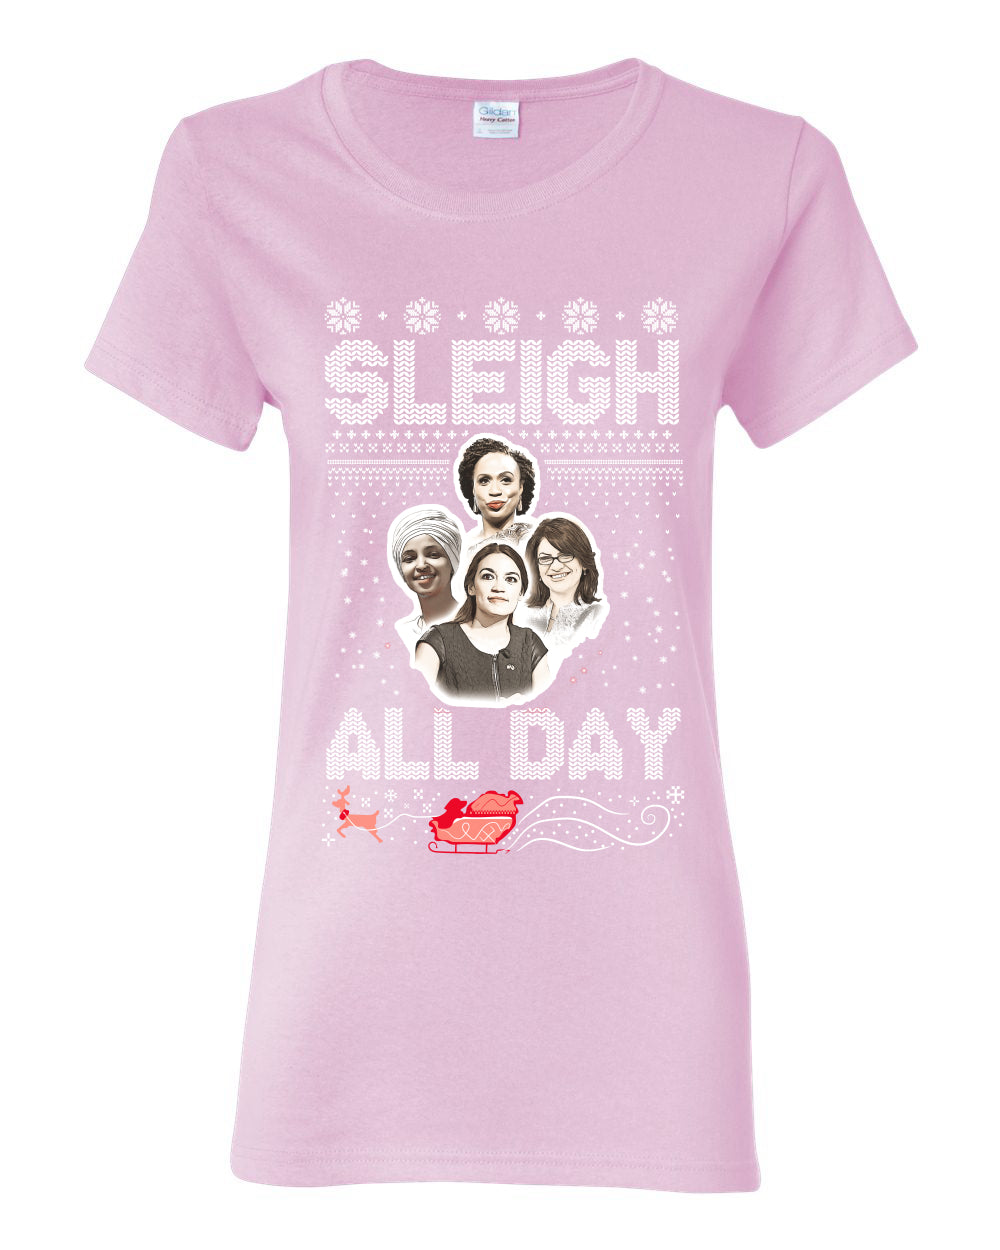 AOC The Squad Congresswomen Sleigh All Day Xmas Ugly Christmas Sweater Womens Graphic T-Shirt